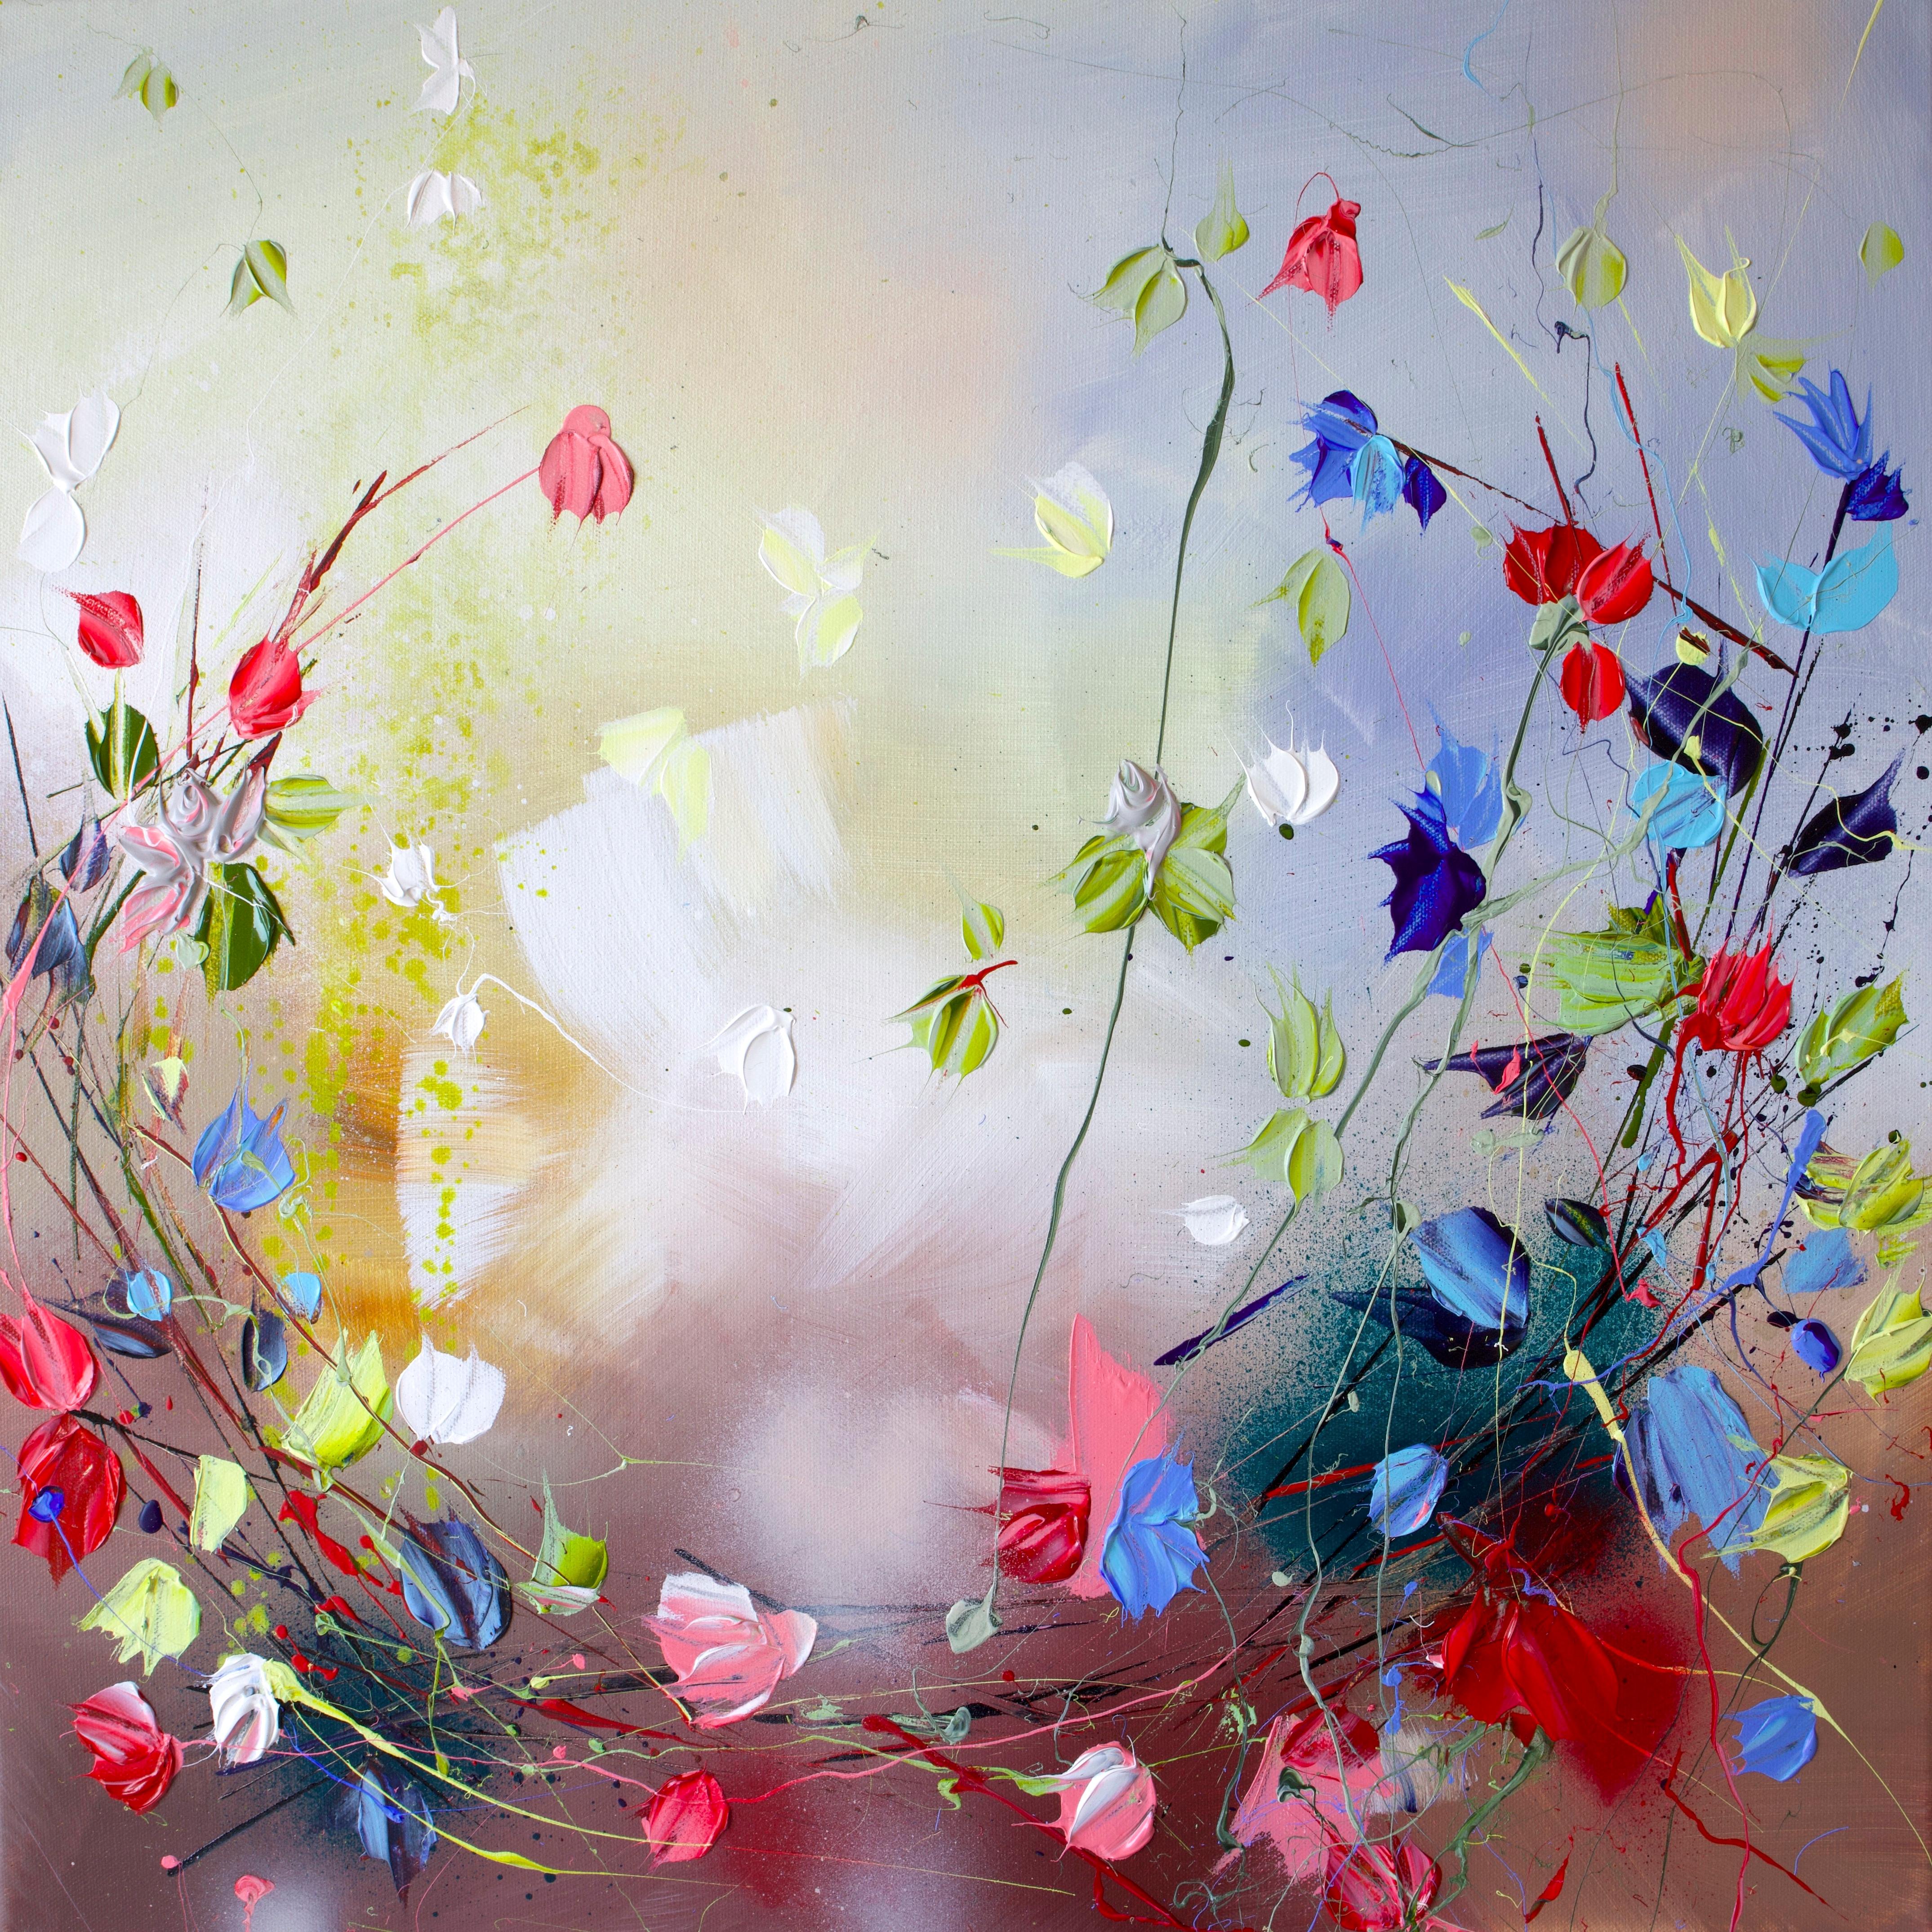 Anastassia Skopp Abstract Painting - Textured colorfull floral painting "Enchanted"